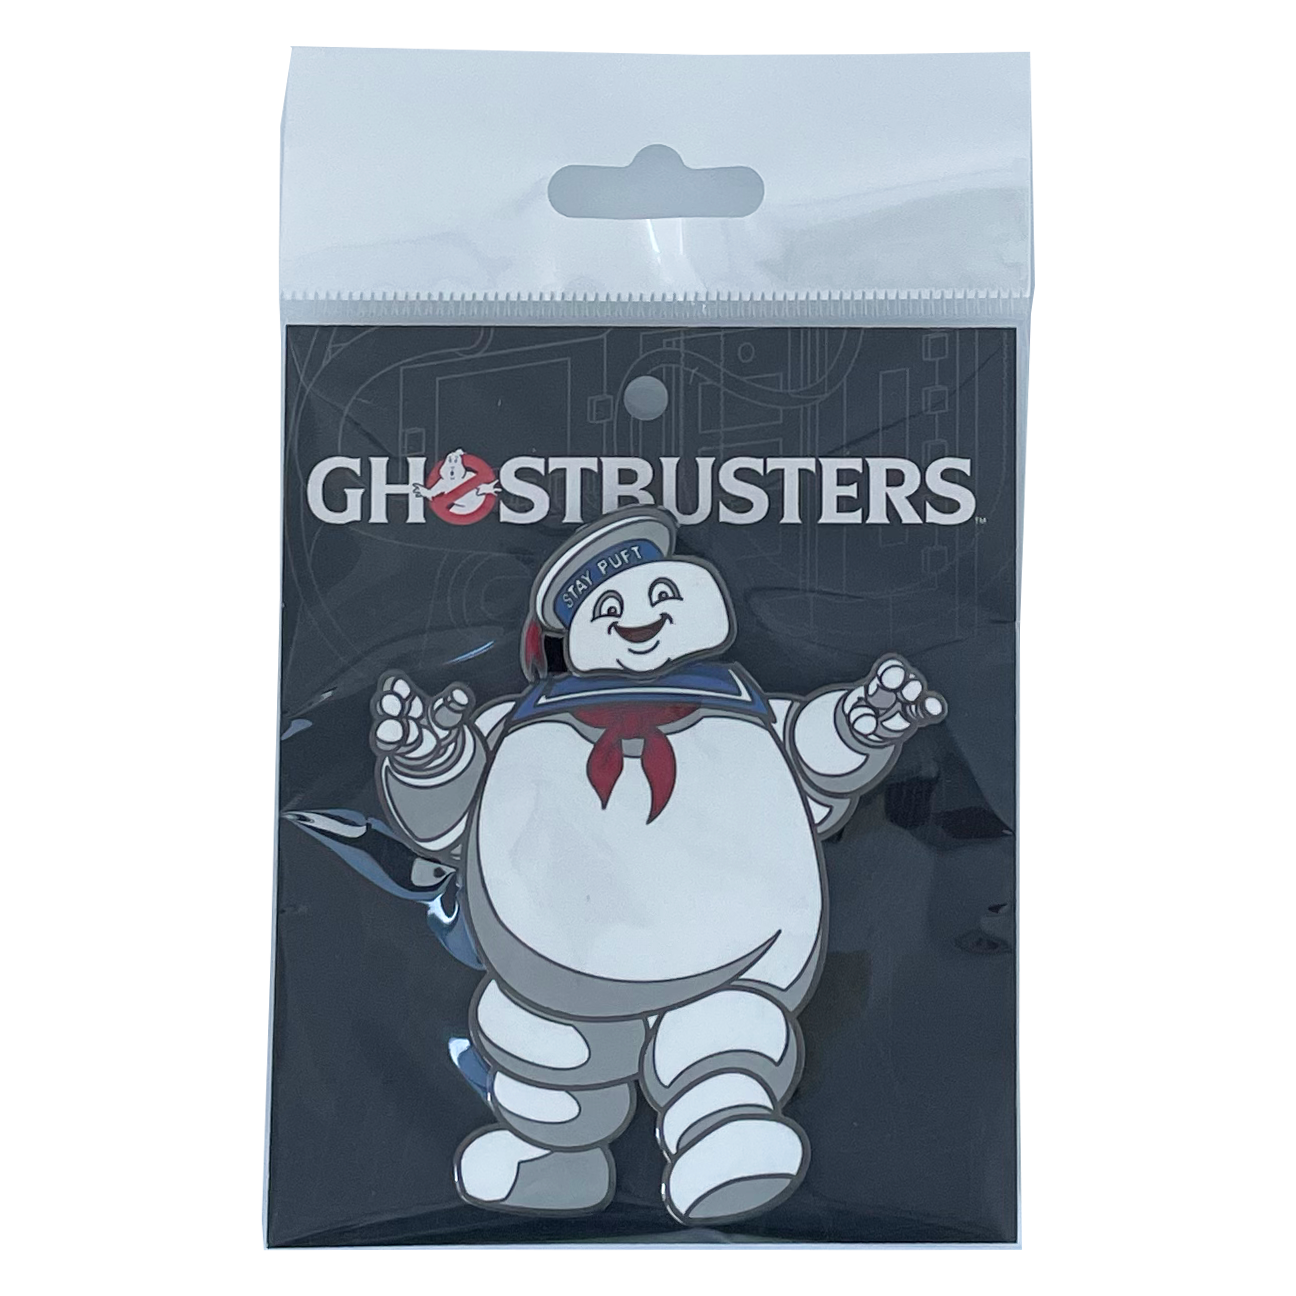 Ghostbusters Stay Puft Marshmallow Man Action Pin - Available 1st Quarter 2022 - Icon Heroes 